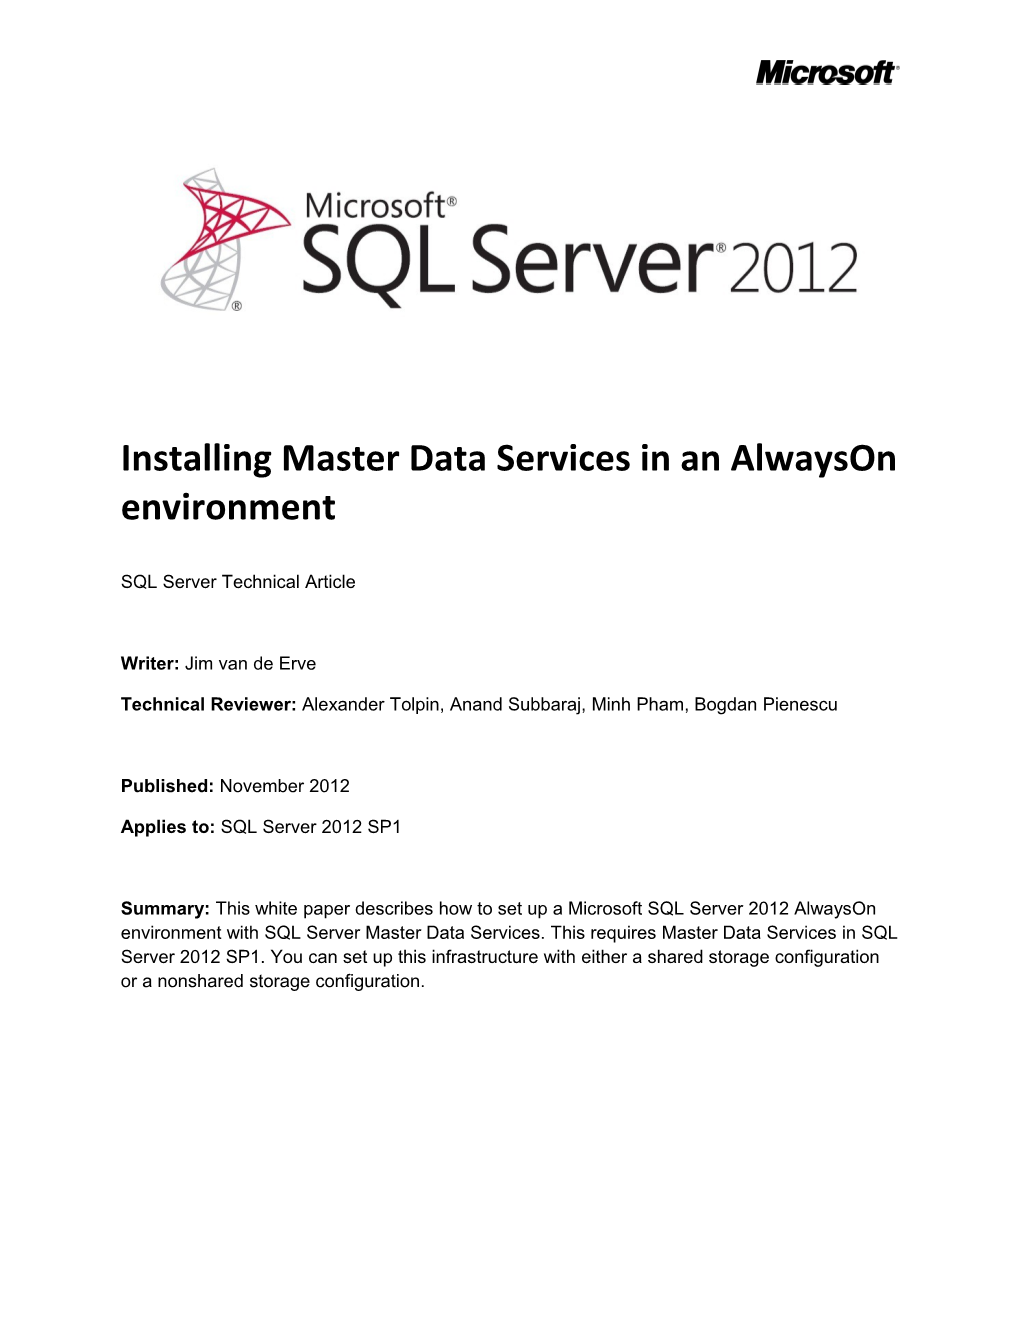 Installing Master Data Services In An Alwayson Environment